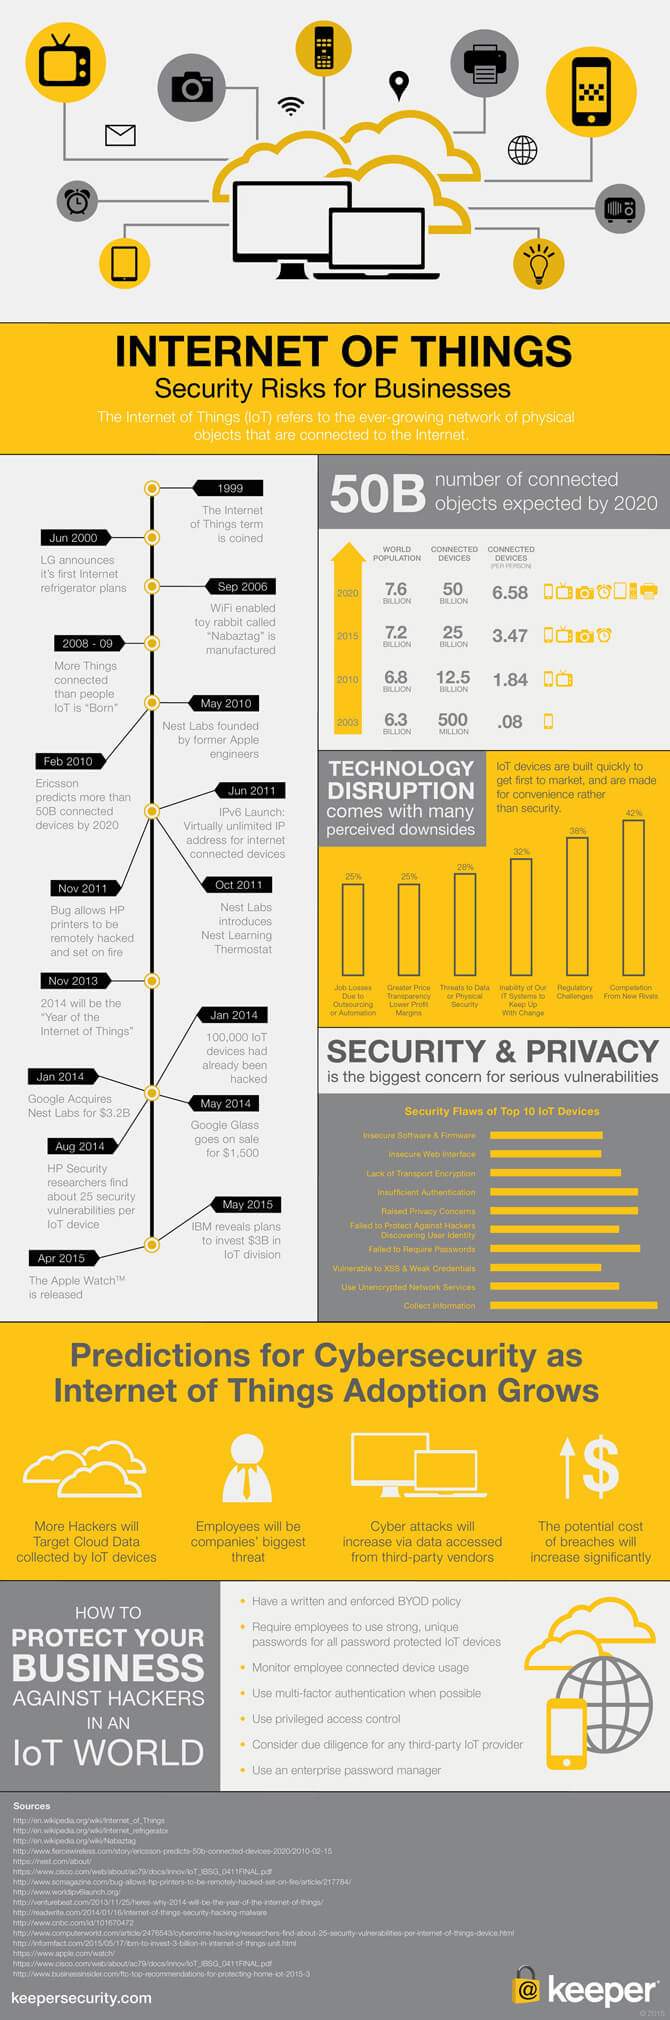 Internet of Things: Security Risks for Businesses [Infographic]